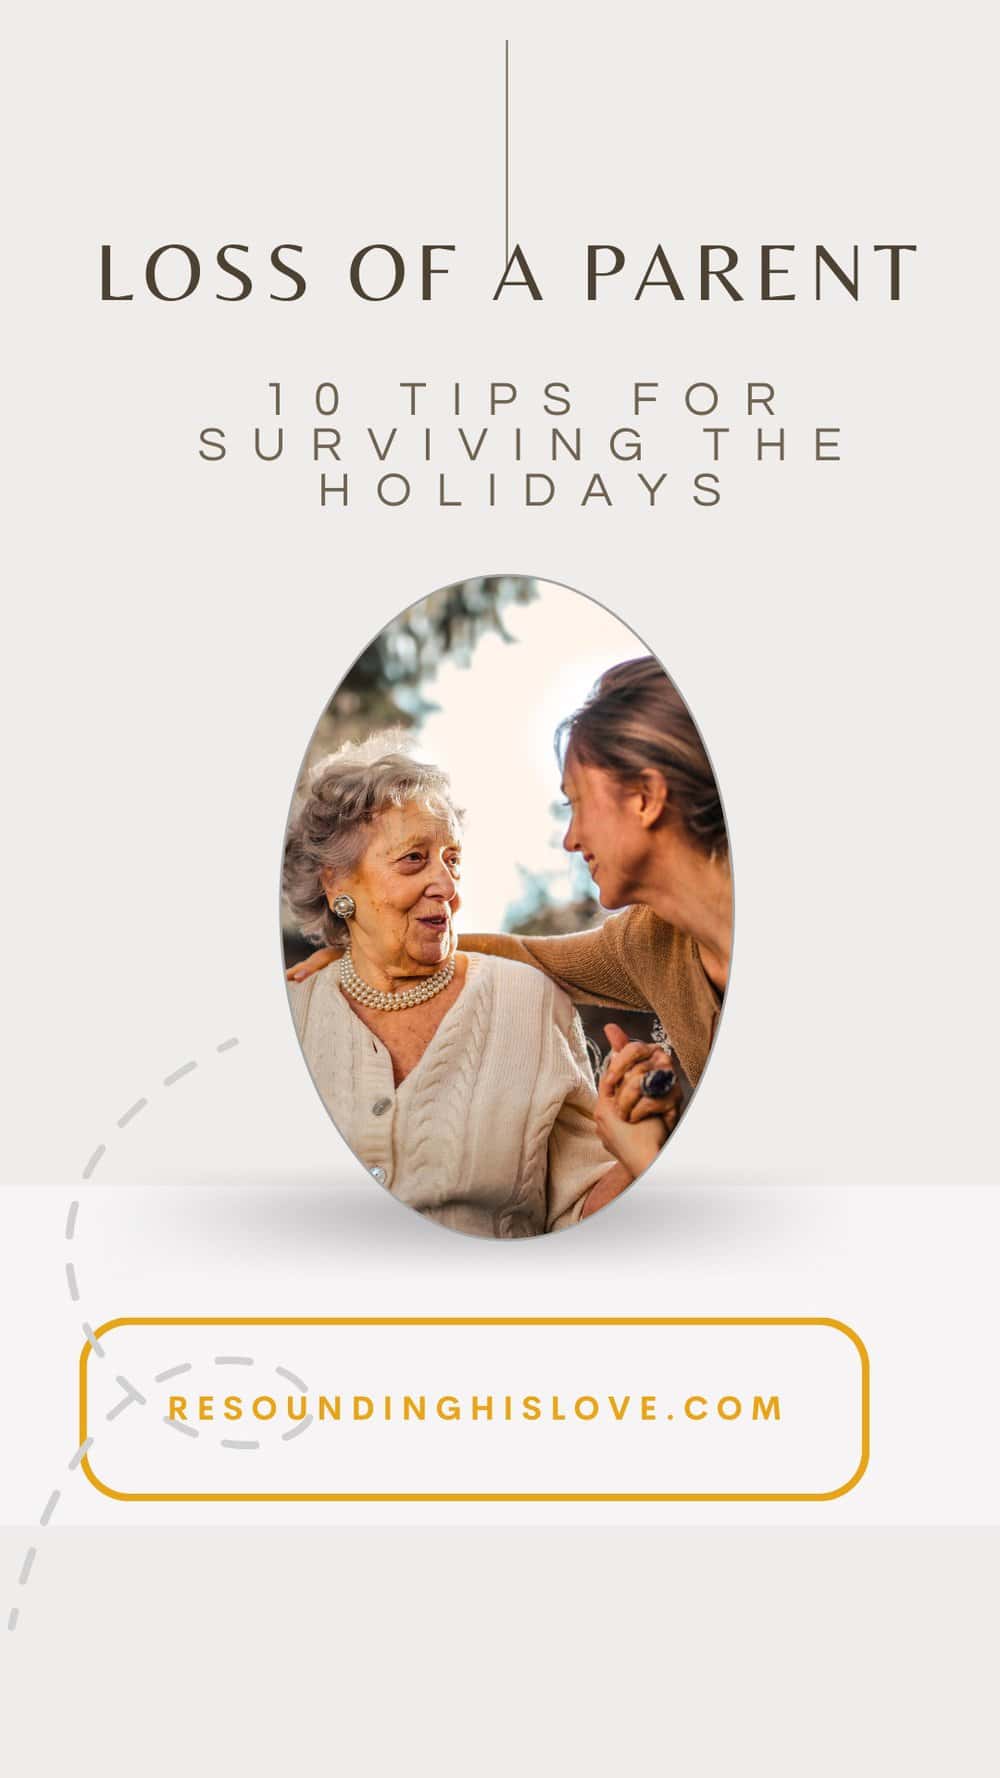 a mother and daughter inside an oval image with text Loss of a Parent 10 Tips for Surviving the holidays